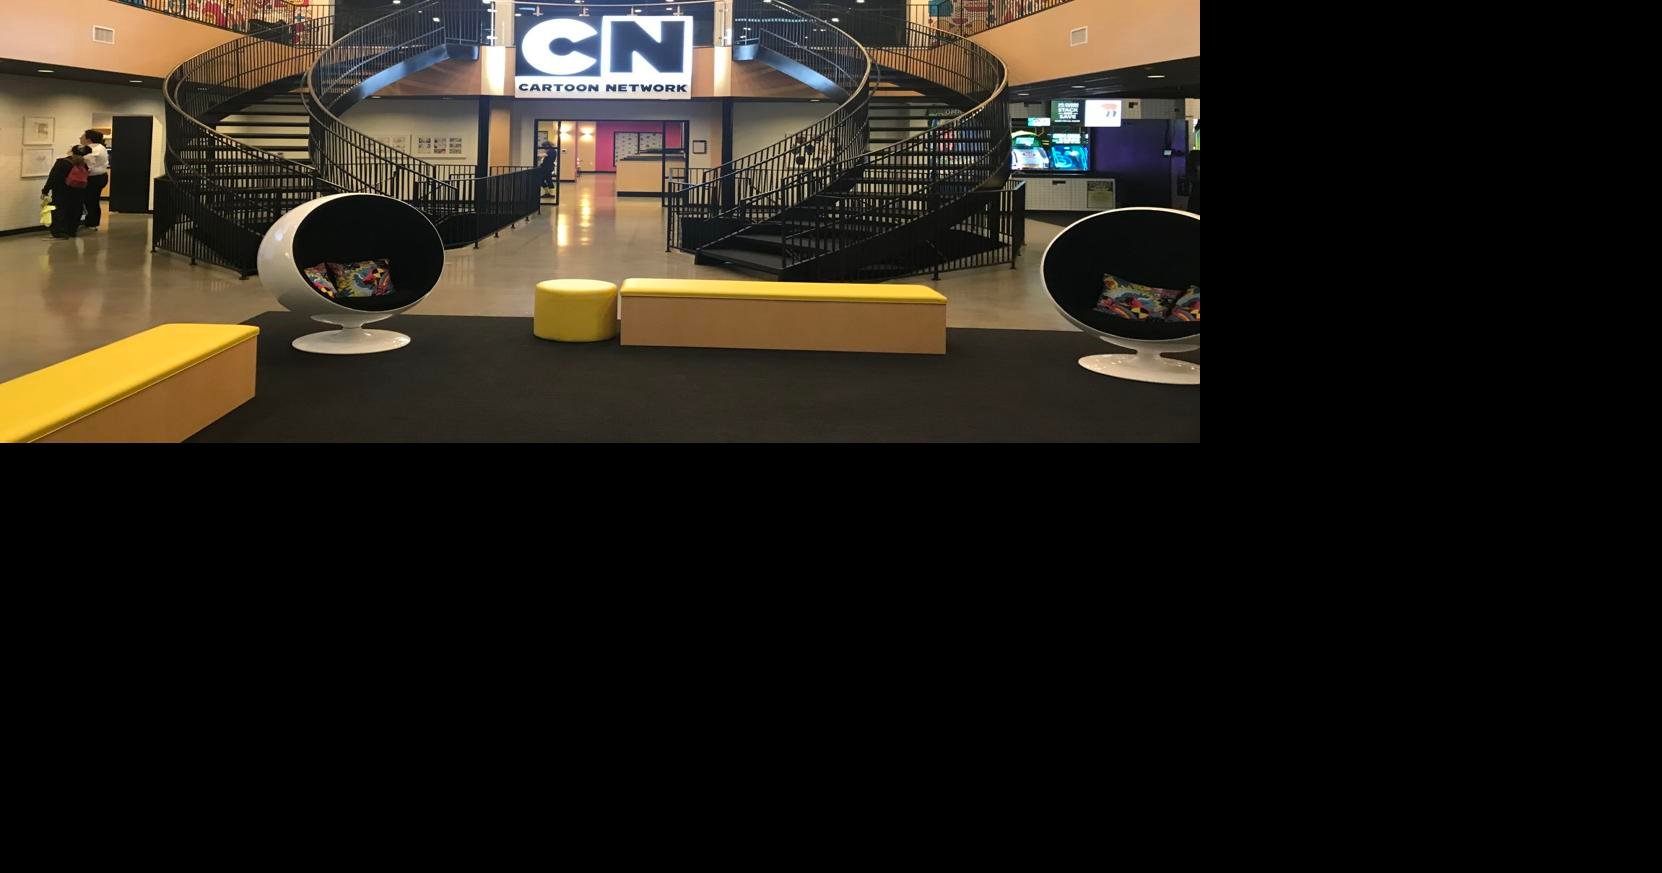 The Cartoon Network hotel located in Lancaster, PA : r